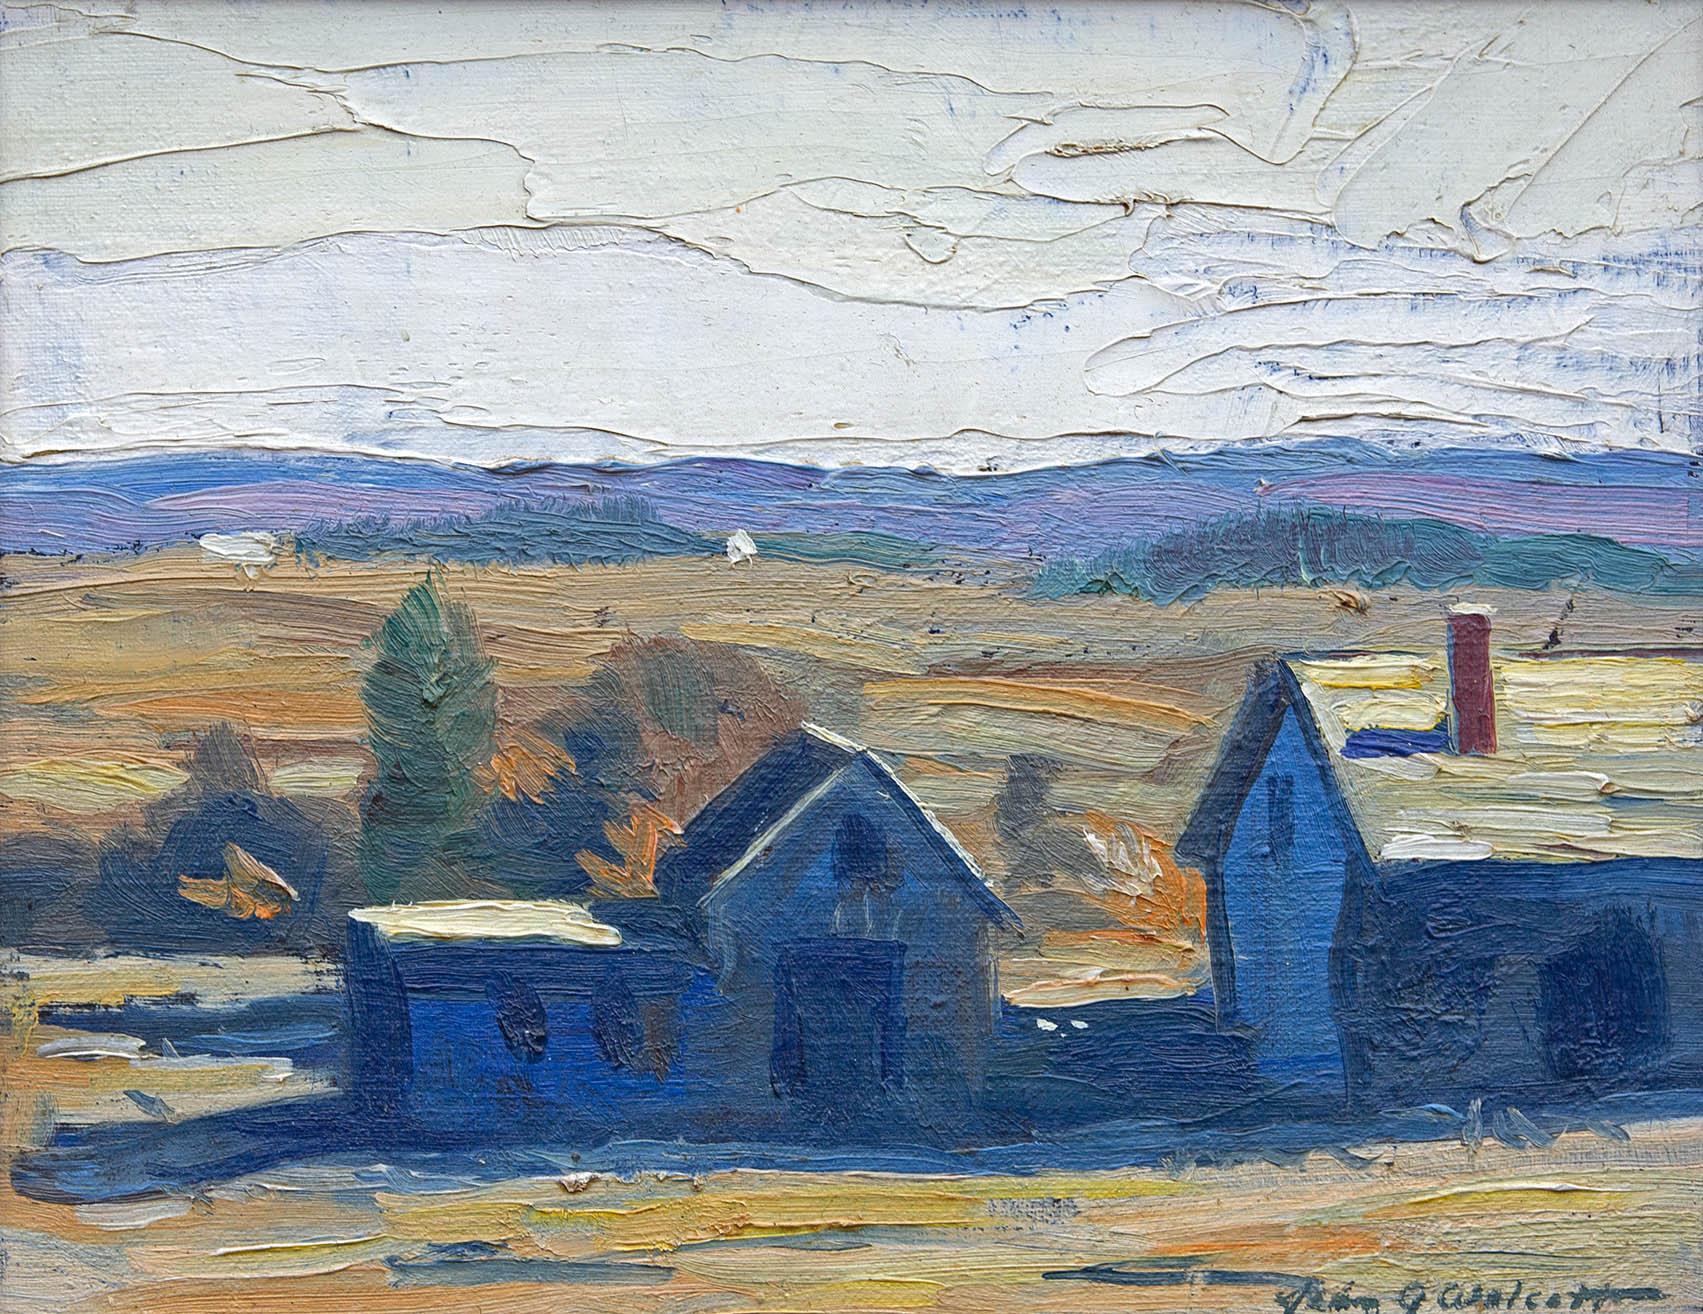 Landscape by New England painter John Wolcott. Bright painting with impasto. Oil on board. Original frame, circa 1920s.

John Gilmore Wolcott, painter, portrait painter, cartoonist, lecturer, teacher, writer, and muralist — was born in Cambridge,